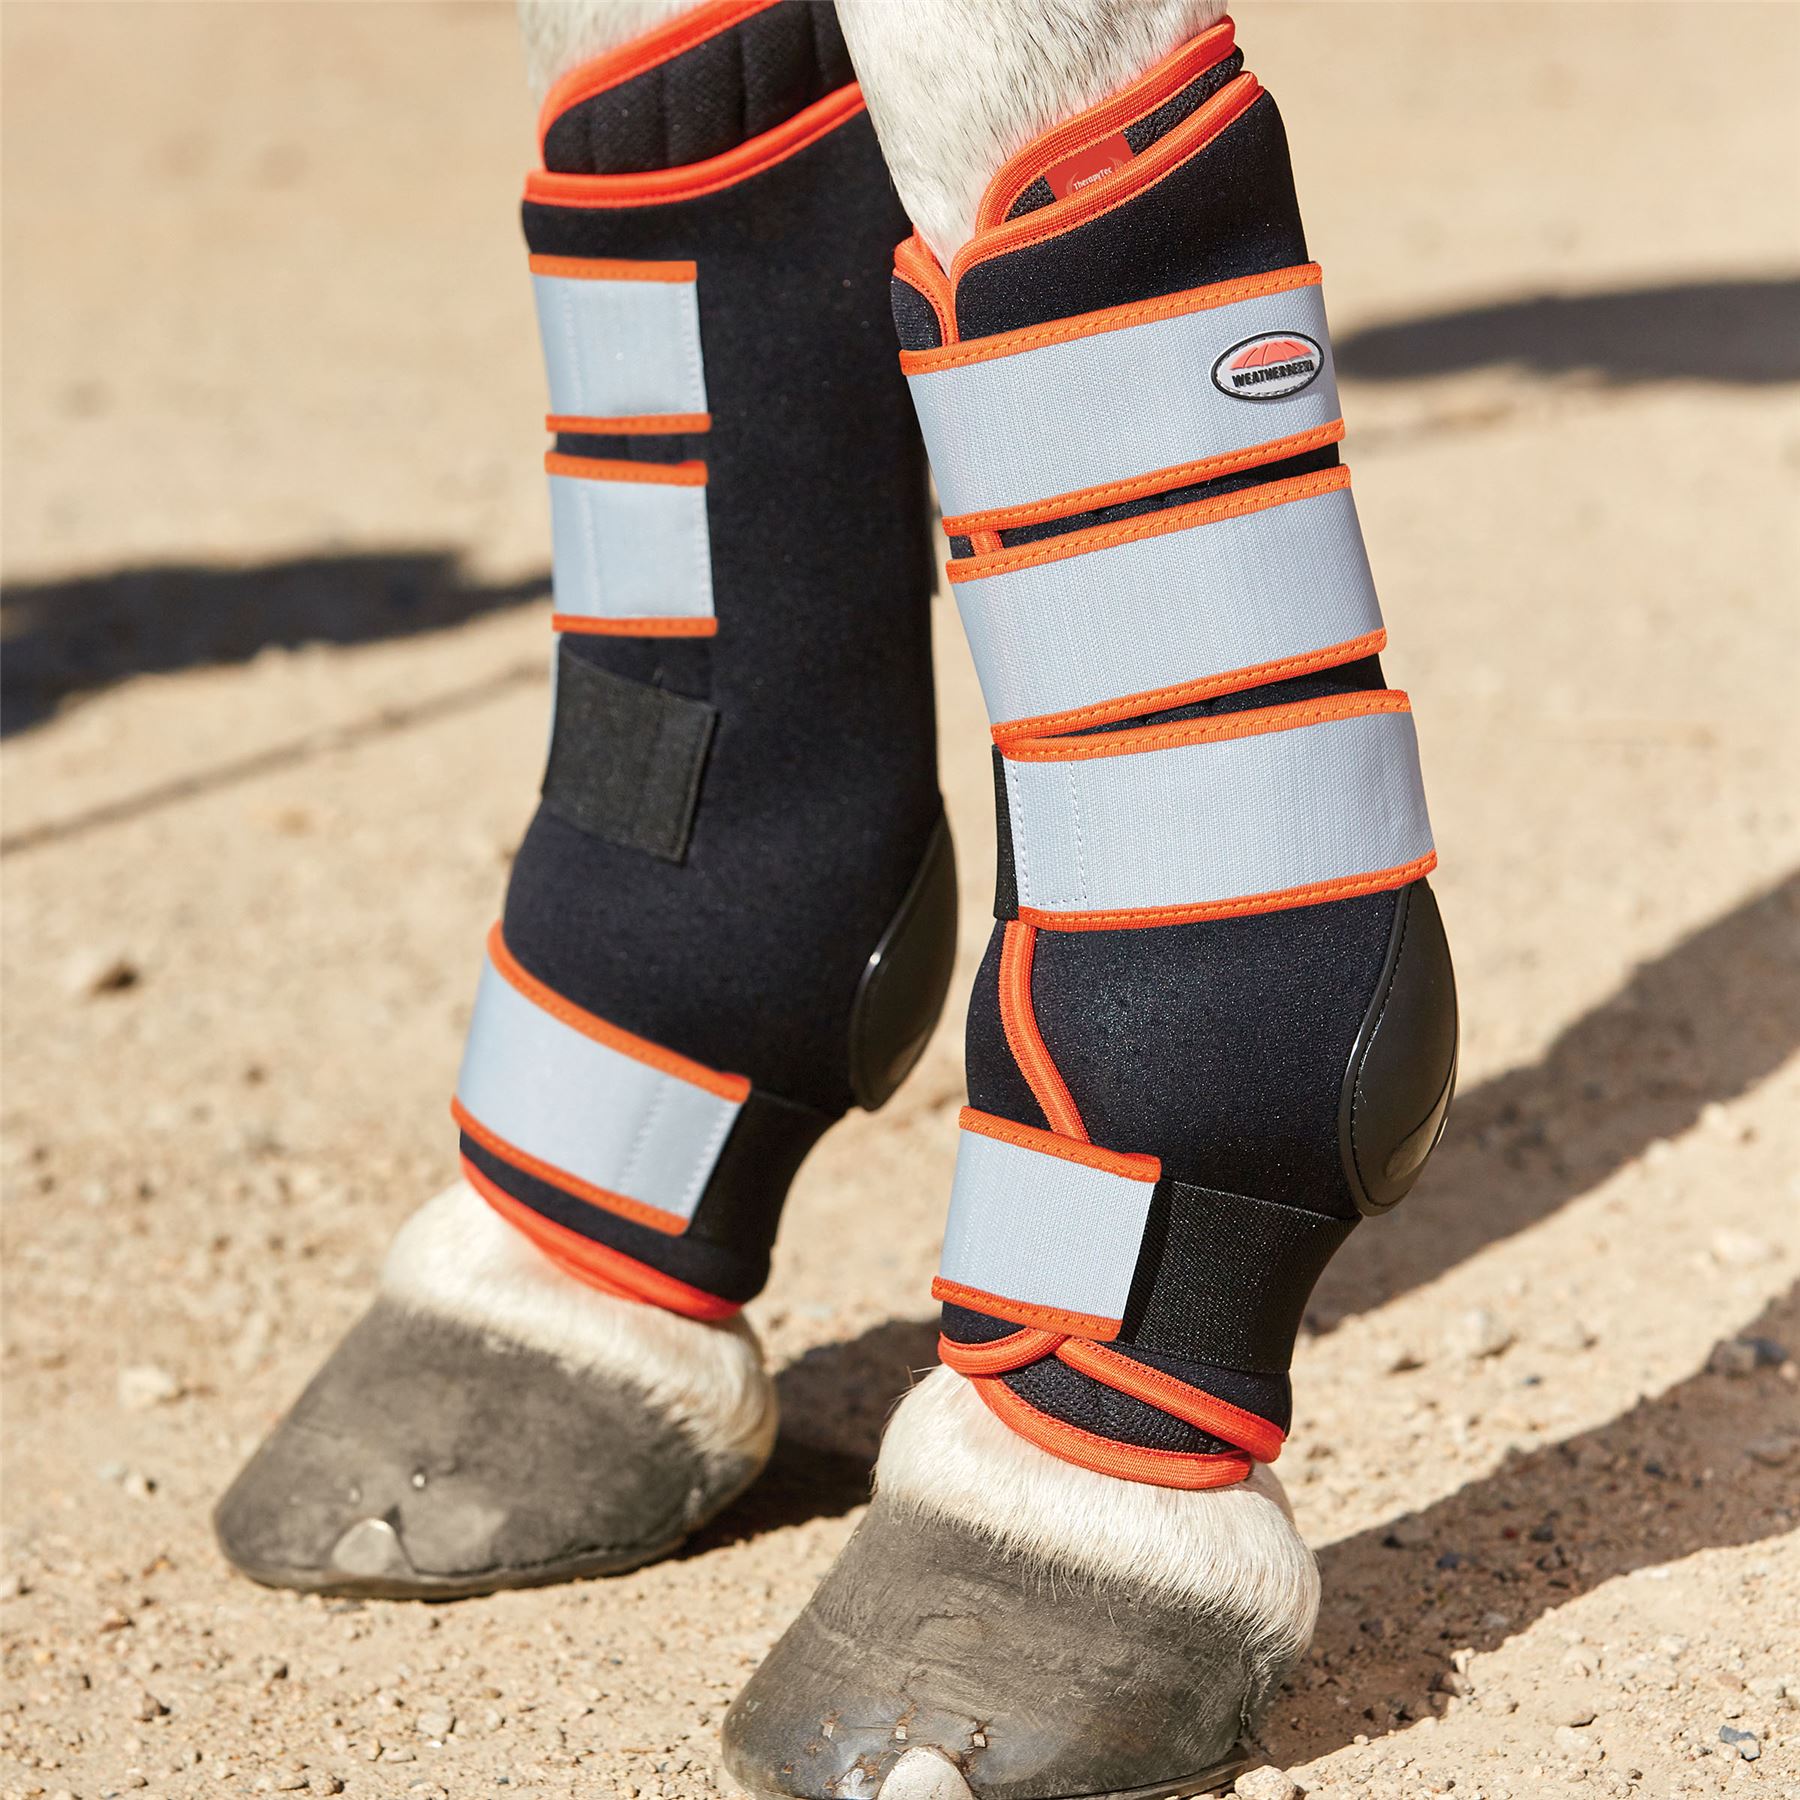 Weatherbeeta Therapy-Tec Stable Boot Wraps - Just Horse Riders